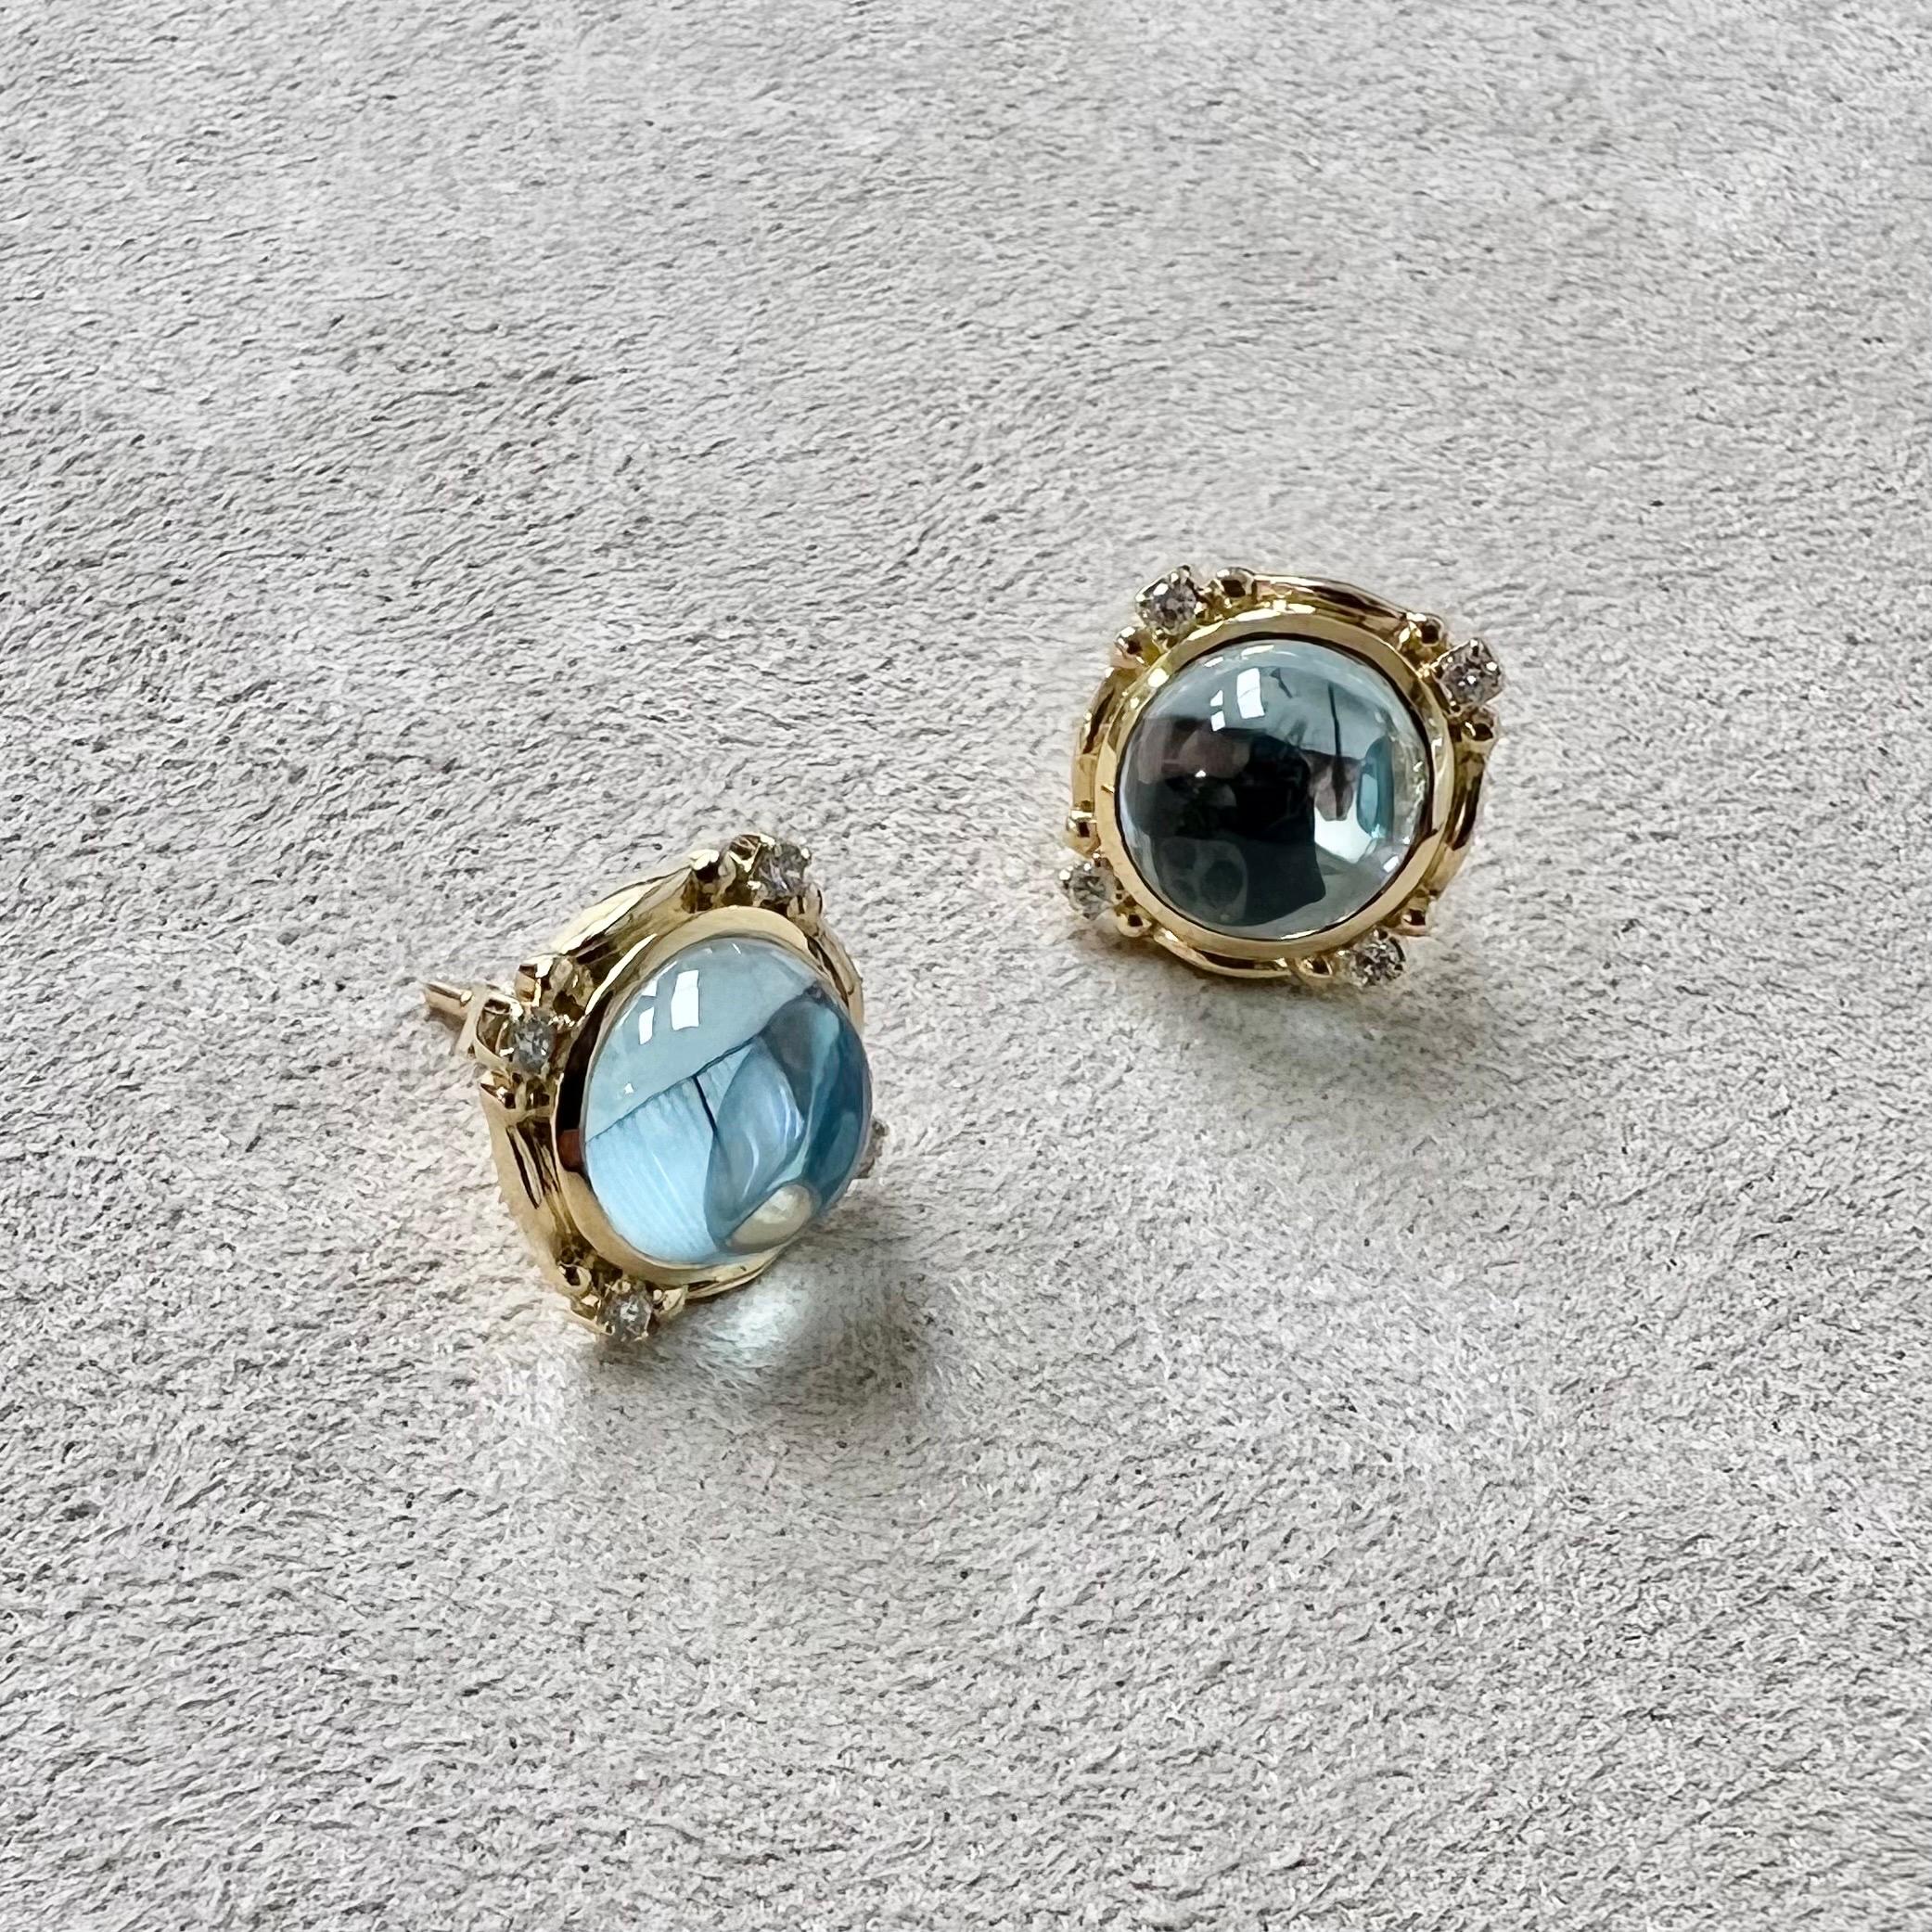 Created in 18 karat yellow gold
Blue topaz 6 carats approx.
Champagne diamonds 0.09 carat approx.
Post backs for pierced ears
Limited edition


About the Designers ~ Dharmesh & Namrata

Drawing inspiration from little things, Dharmesh & Namrata